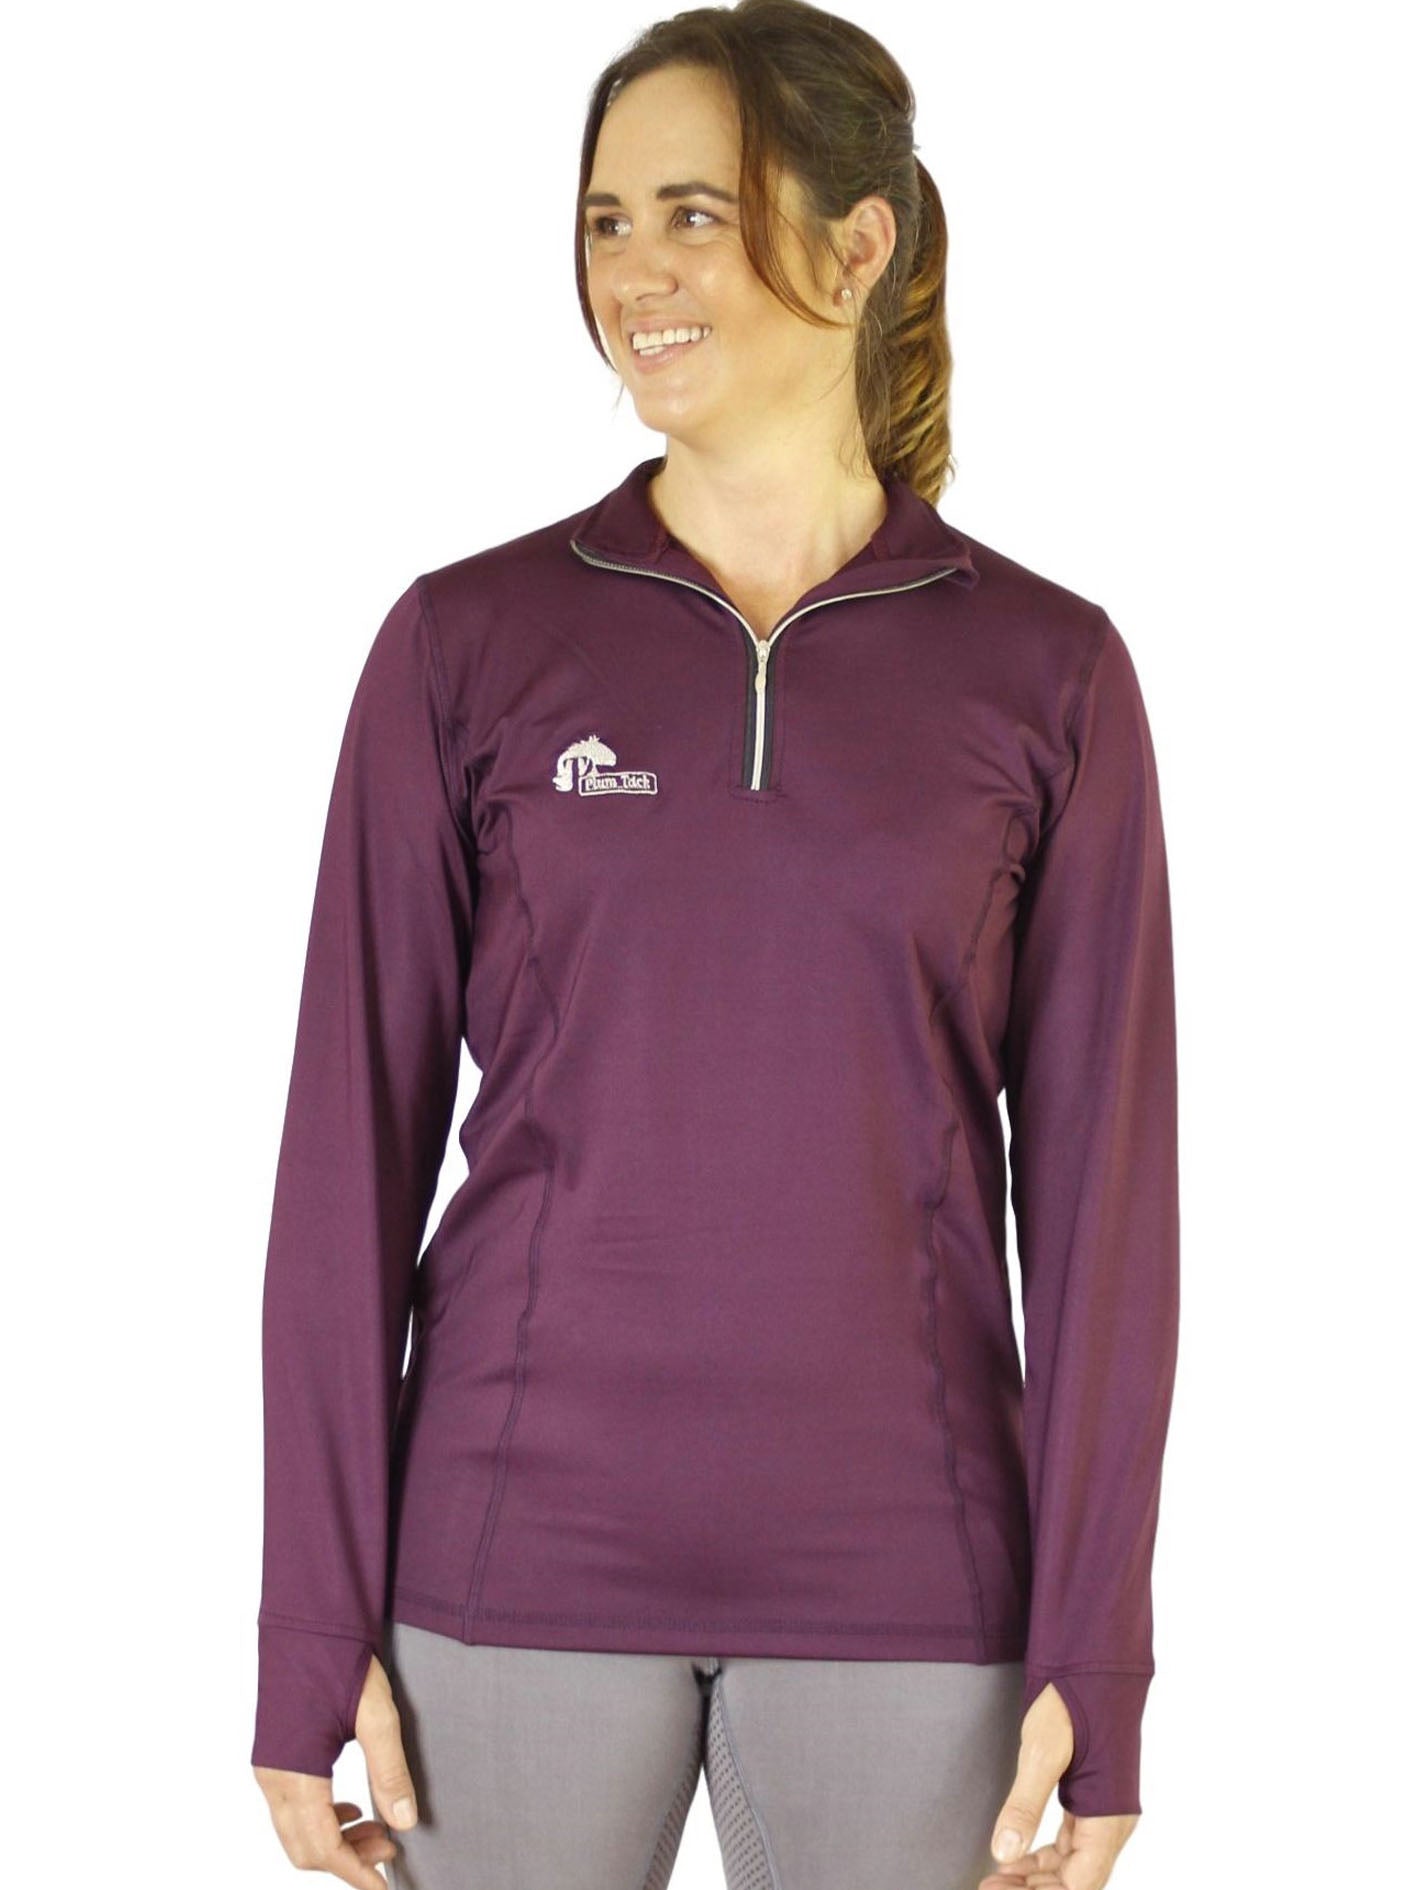 Long sleeve base layer tops in Wine - Final run outlast sizes